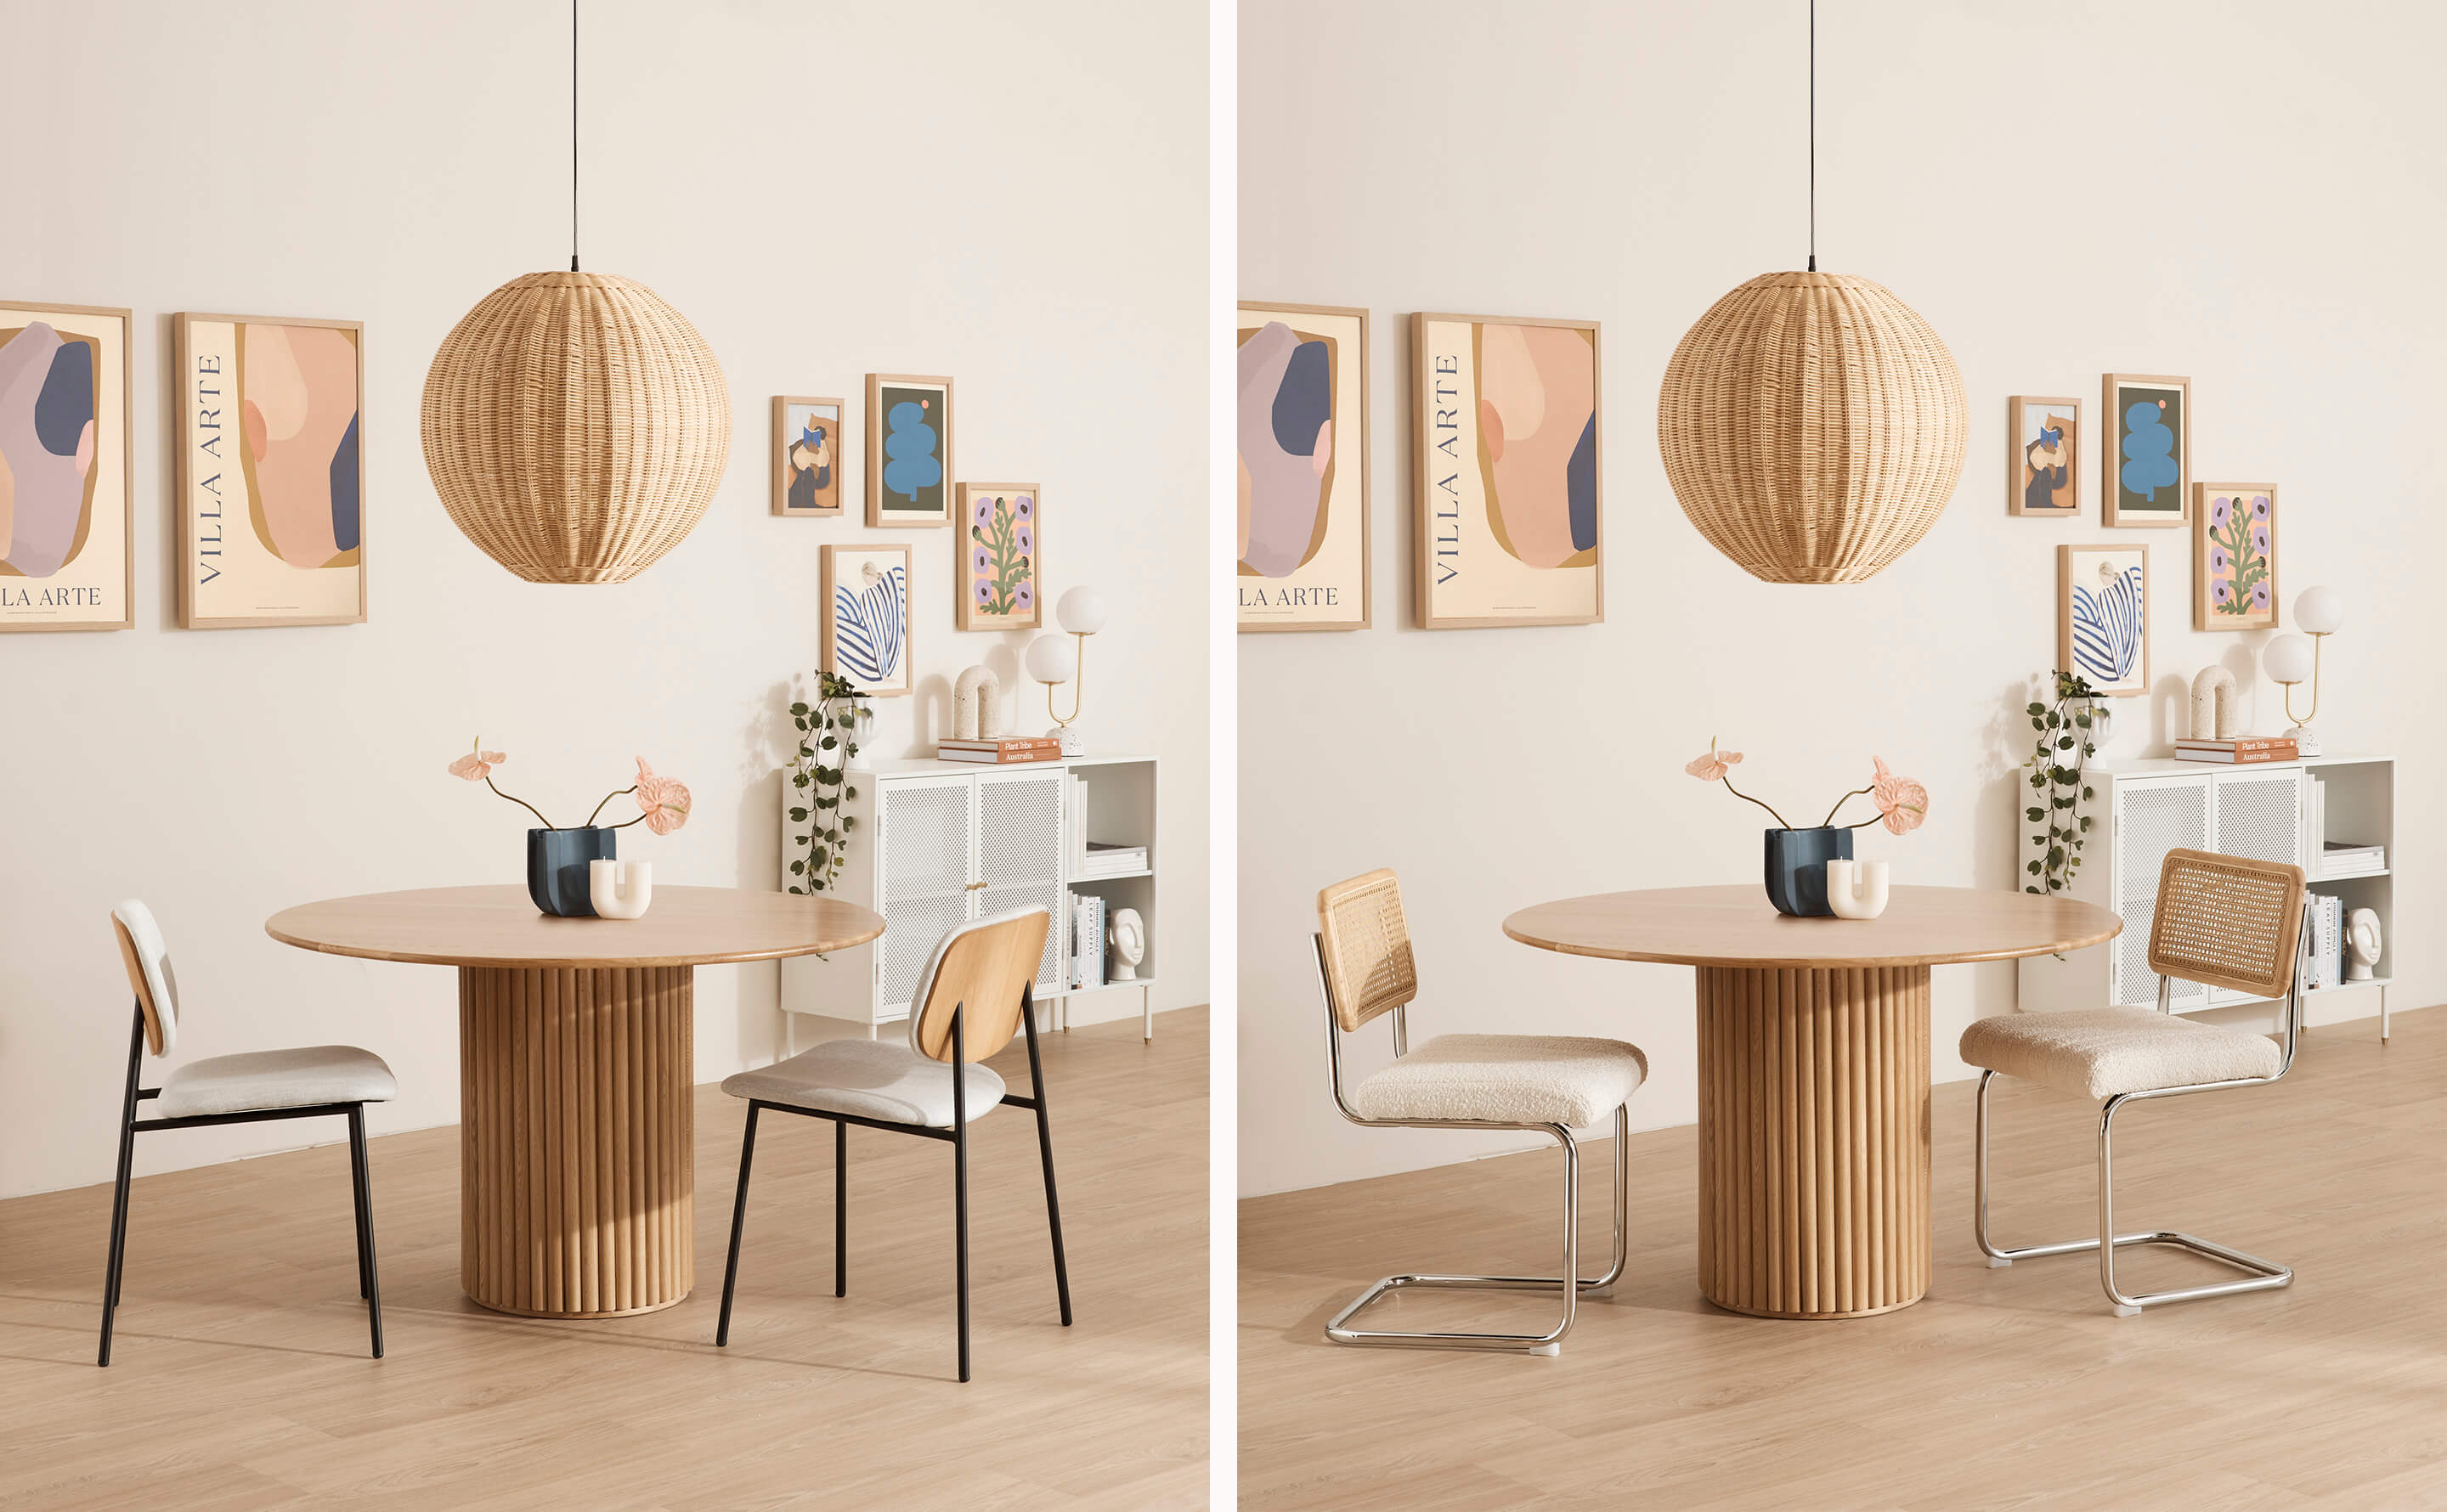 Introducing our Abode Spring Summer 22 collection, full of neutral yet fun living, dining, home office, and bedroom spaces. Shop the Bronte living and dining collection online or in-store now!